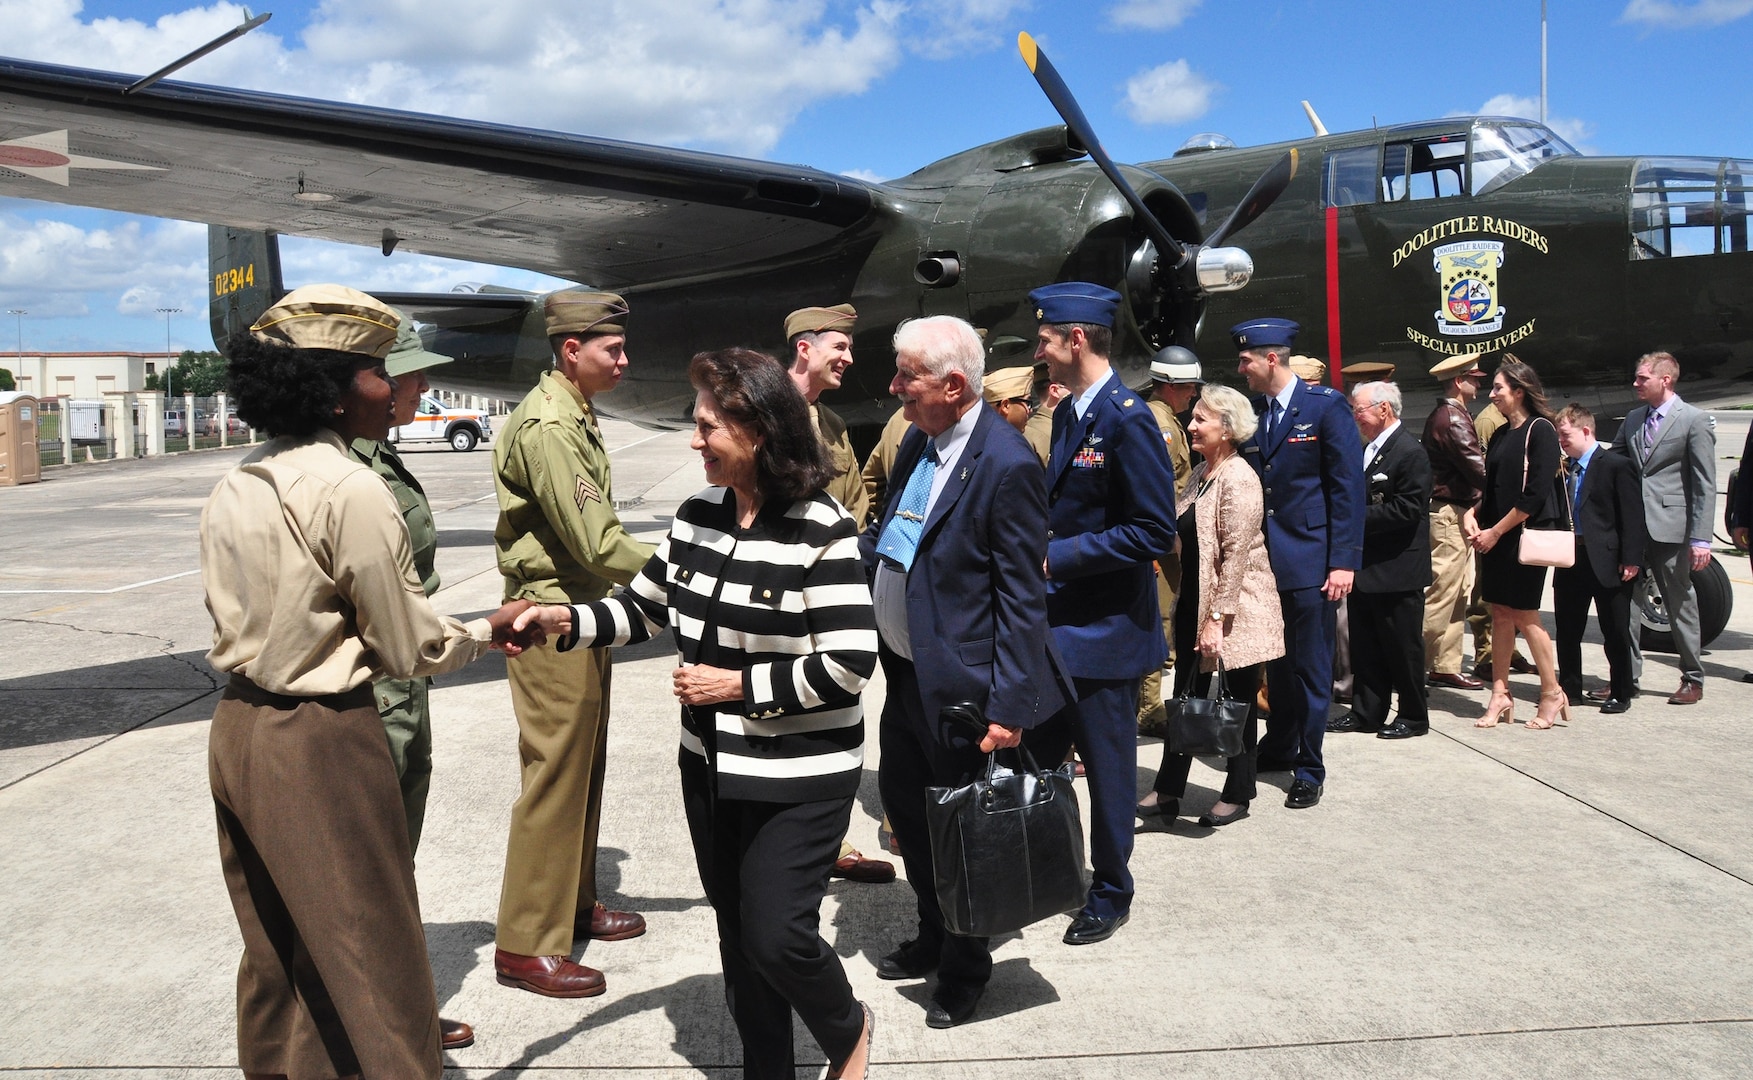 The family of retired U.S. Air Force Lt. Col. Richard “Dick” E. Cole shake hands with Airmen dressed in WWII uniforms at a B-25 Mitchell static display during a memorial service for their father at Joint Base San Antonio-Randolph April 18. Cole, the last surviving Doolittle Raider, was the co-pilot on a B-25 Mitchell for then-Col. Jimmy Doolittle during the storied World War II Doolittle Tokyo Raid.